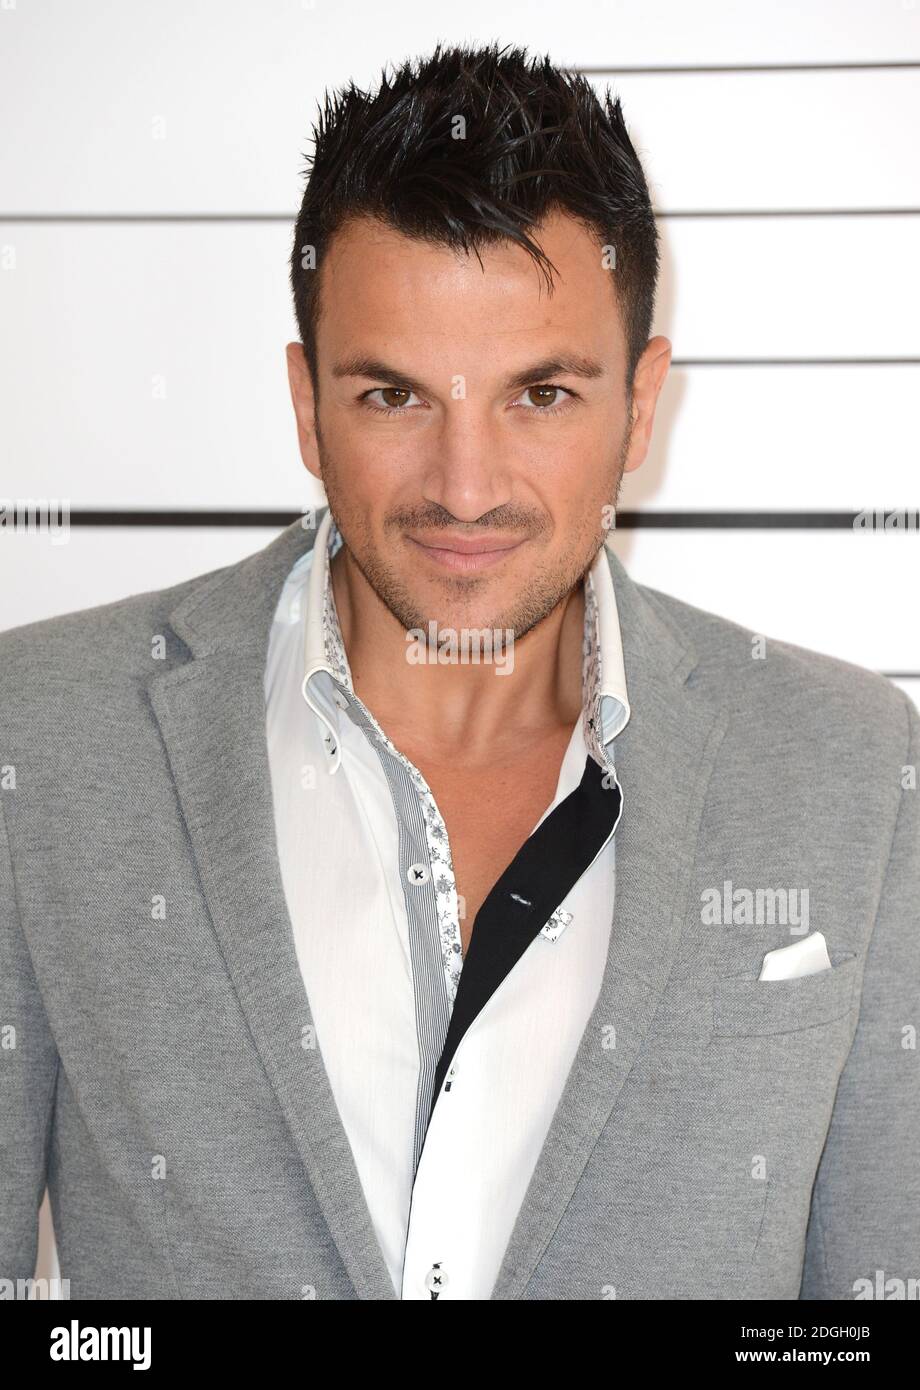 Peter Andre launching his new menswear clothing range 'Alpha by Peter Andre' at the Worx Studios, London. Stock Photo